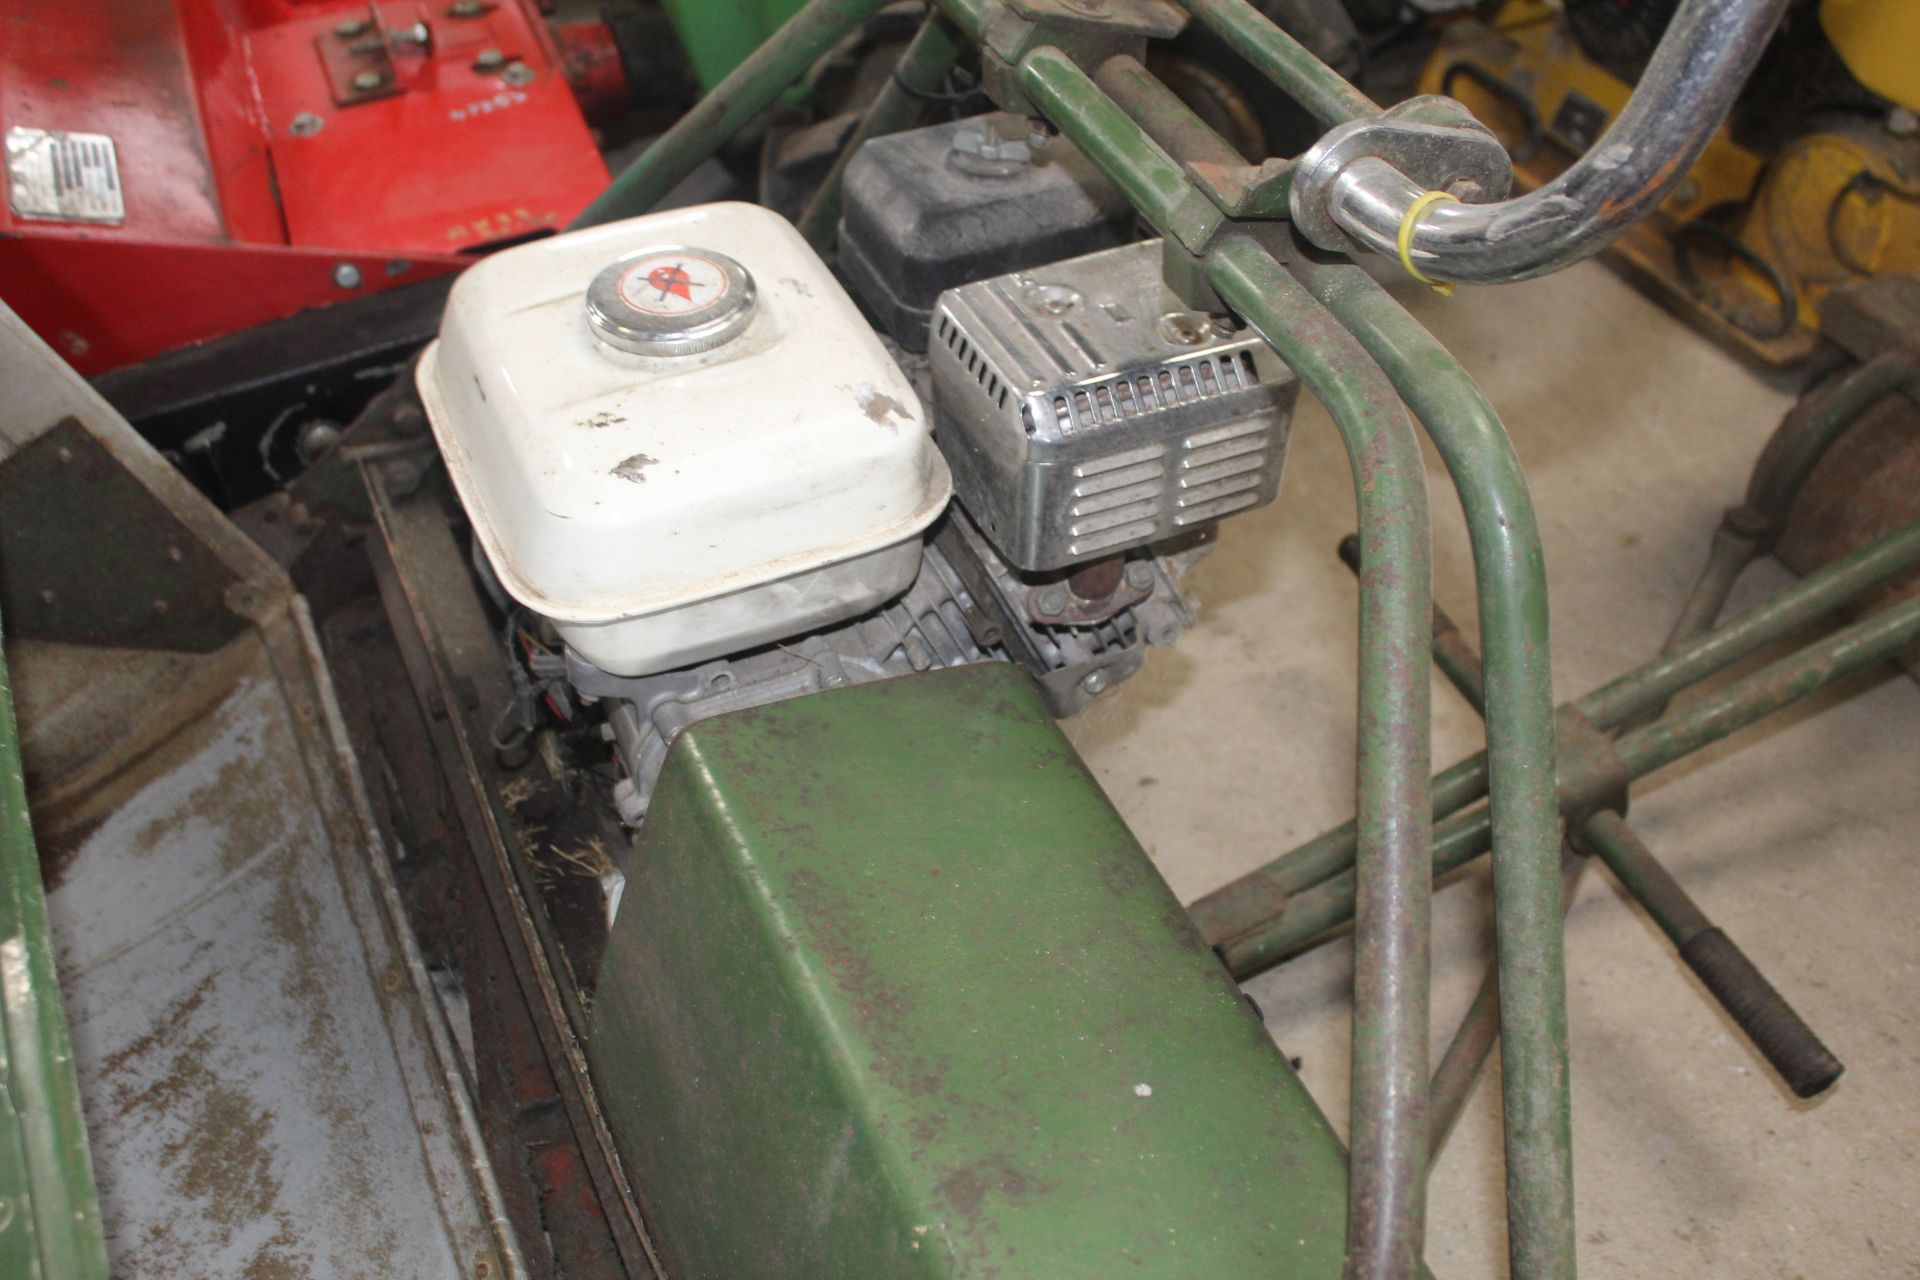 Atco B30 Royal lawn mower. With roller seat and grass box. From local deceased estate. - Image 5 of 11